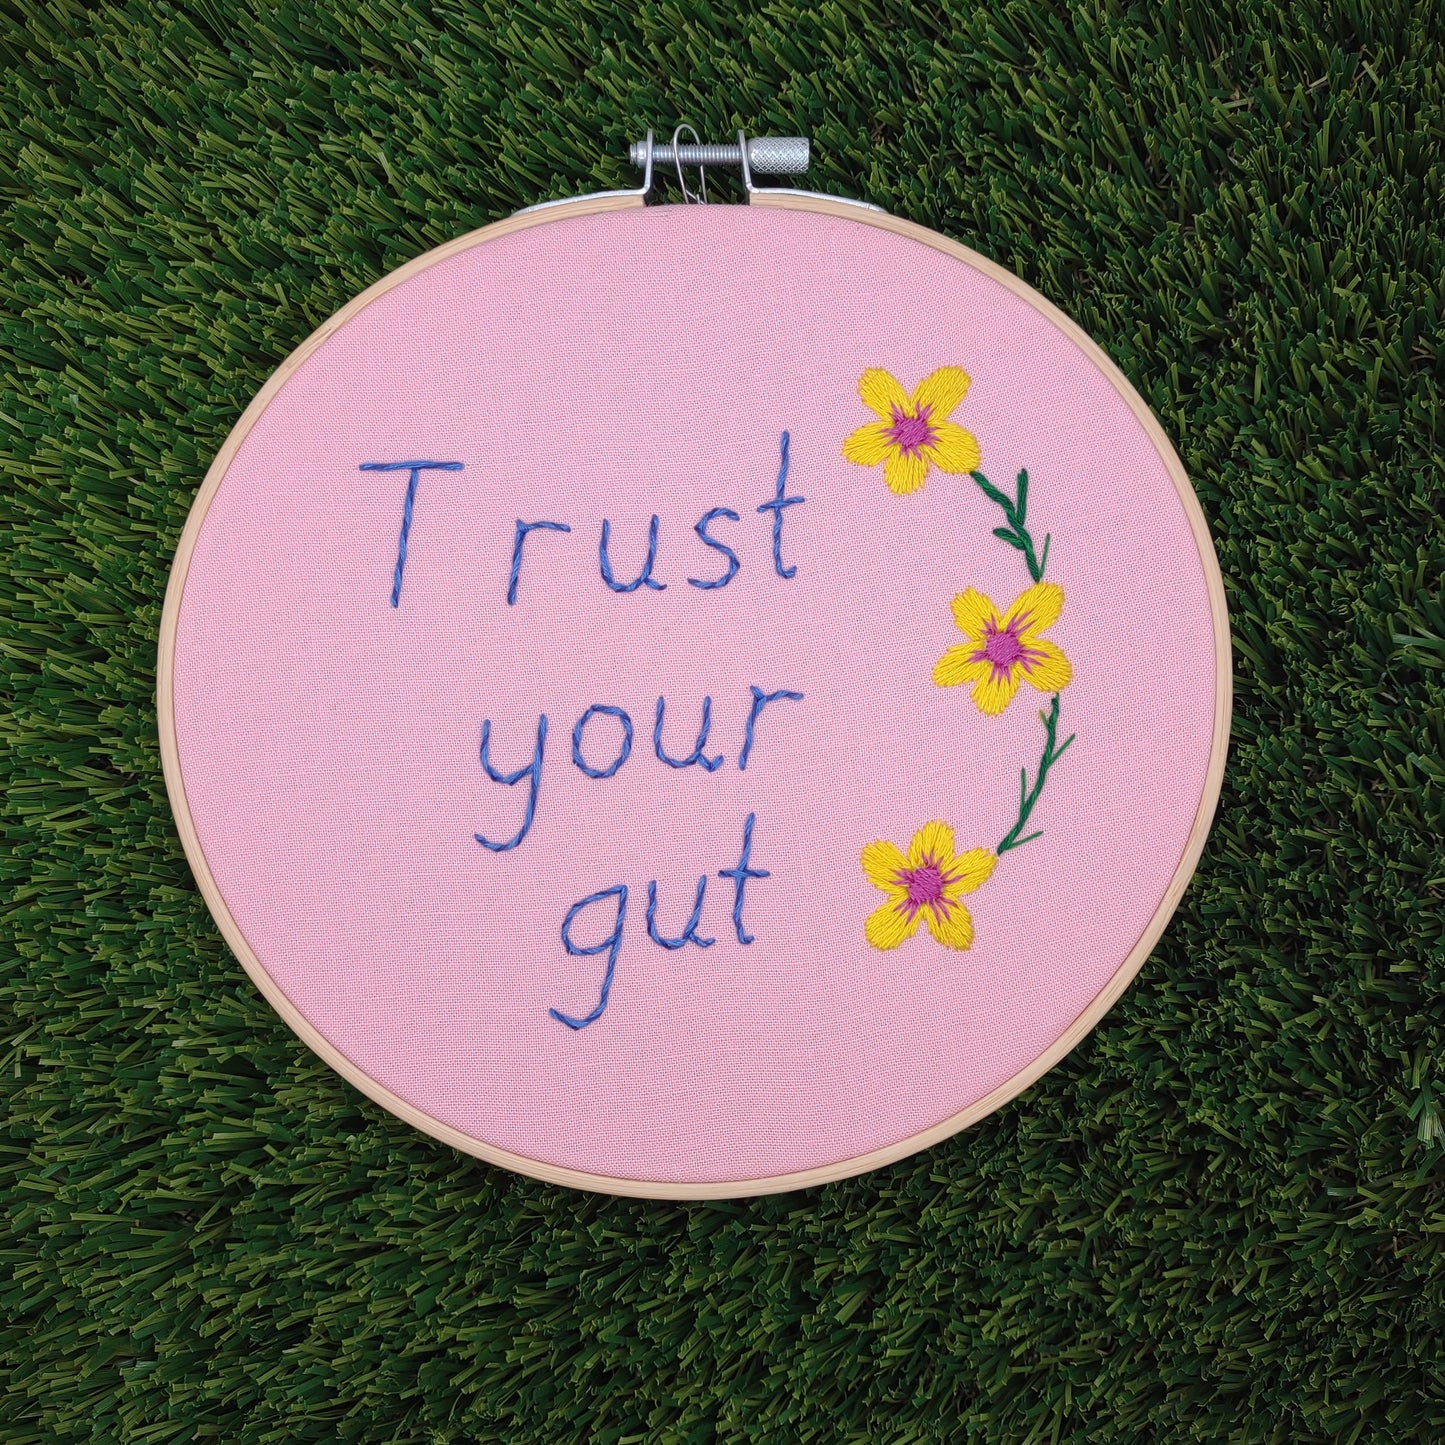 "Trust your gut" Handmade Embroidery 6 inch